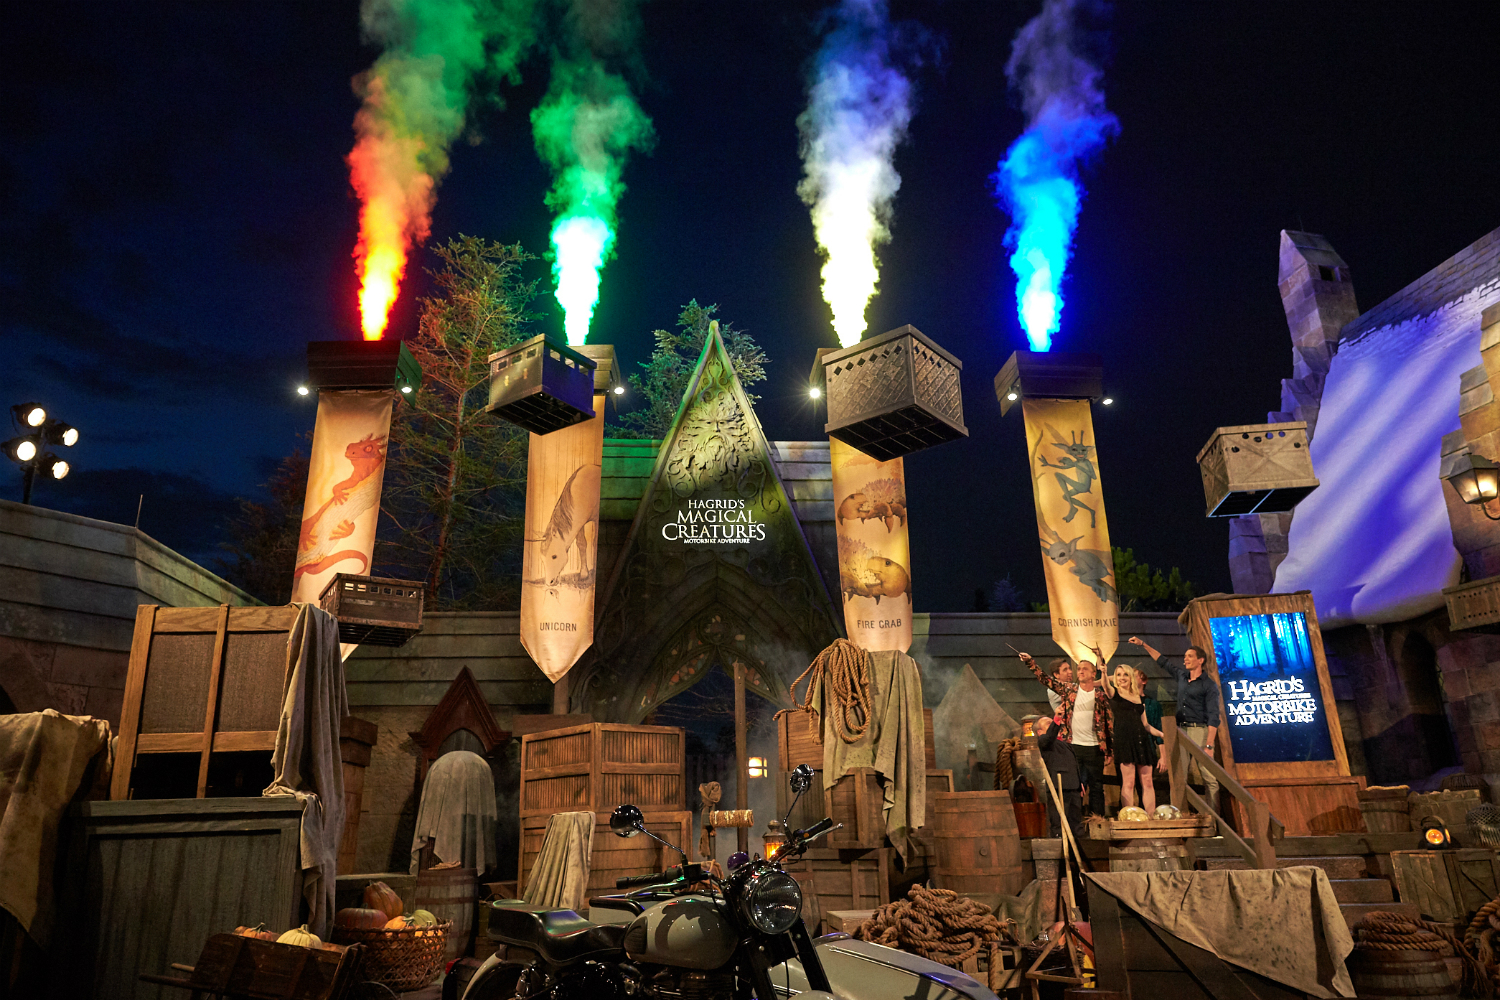 With the help of the Levitation Charm, the objects blocking the entrance to the ride are lifted out of the way as jets of red, green, yellow, and blue light and smoke shoot out above the banners.